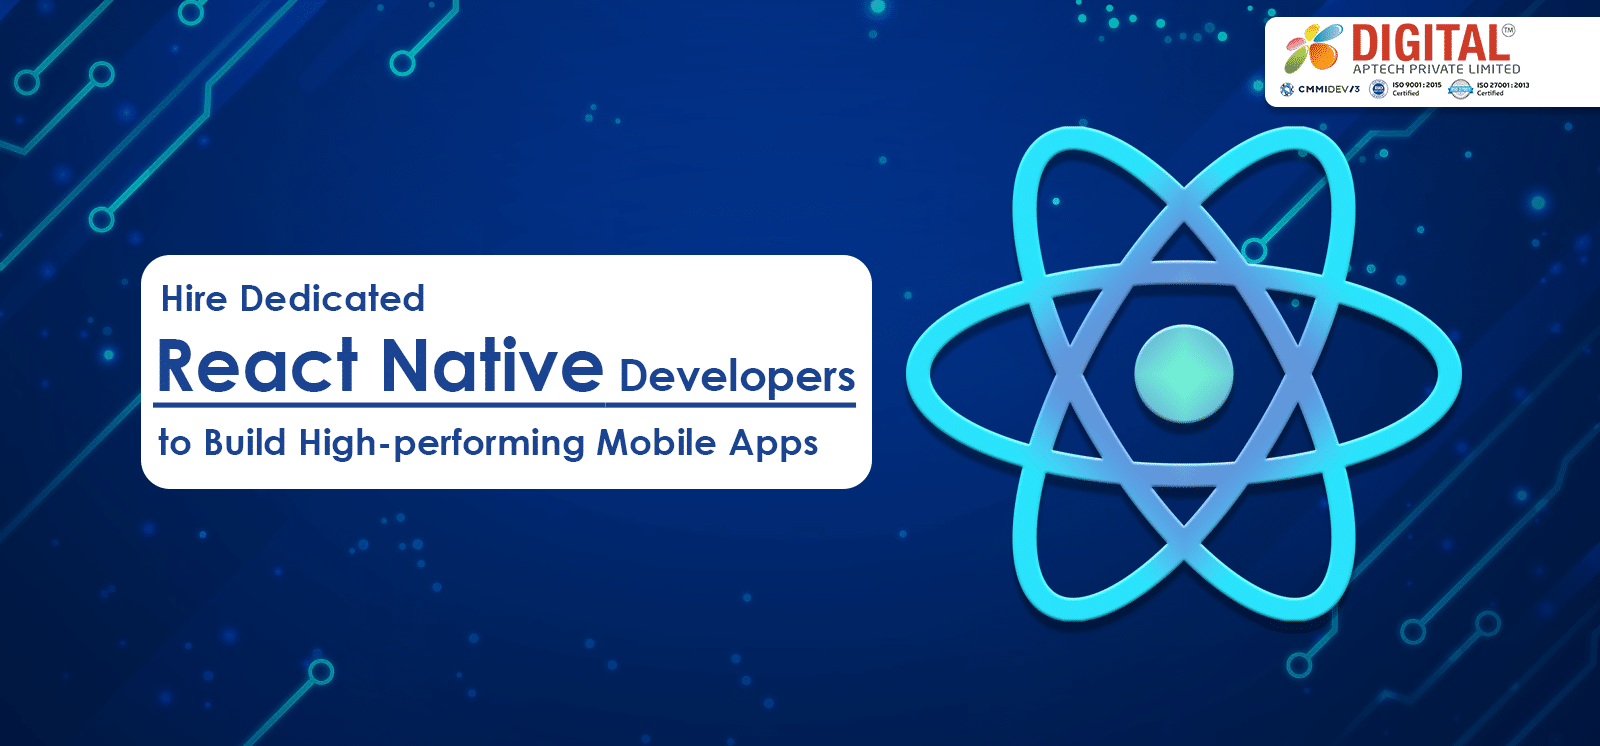 Hire Dedicated React Native Developers to Build High-performing Mobile Apps